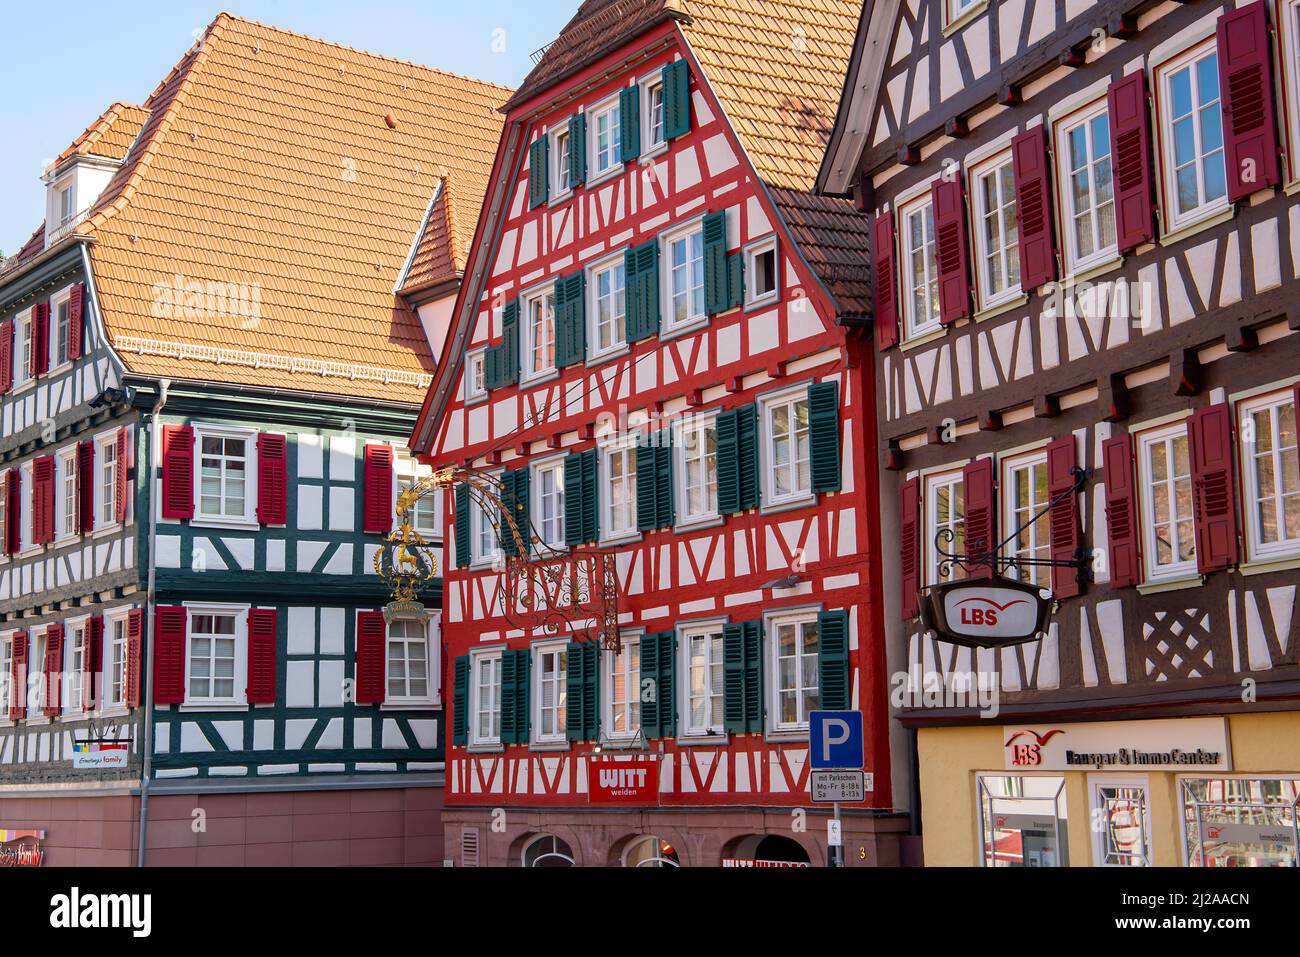 Picturesque half-timbered houses in Calw old town, market place. Baden-Württemberg, Germany. Stock Photo